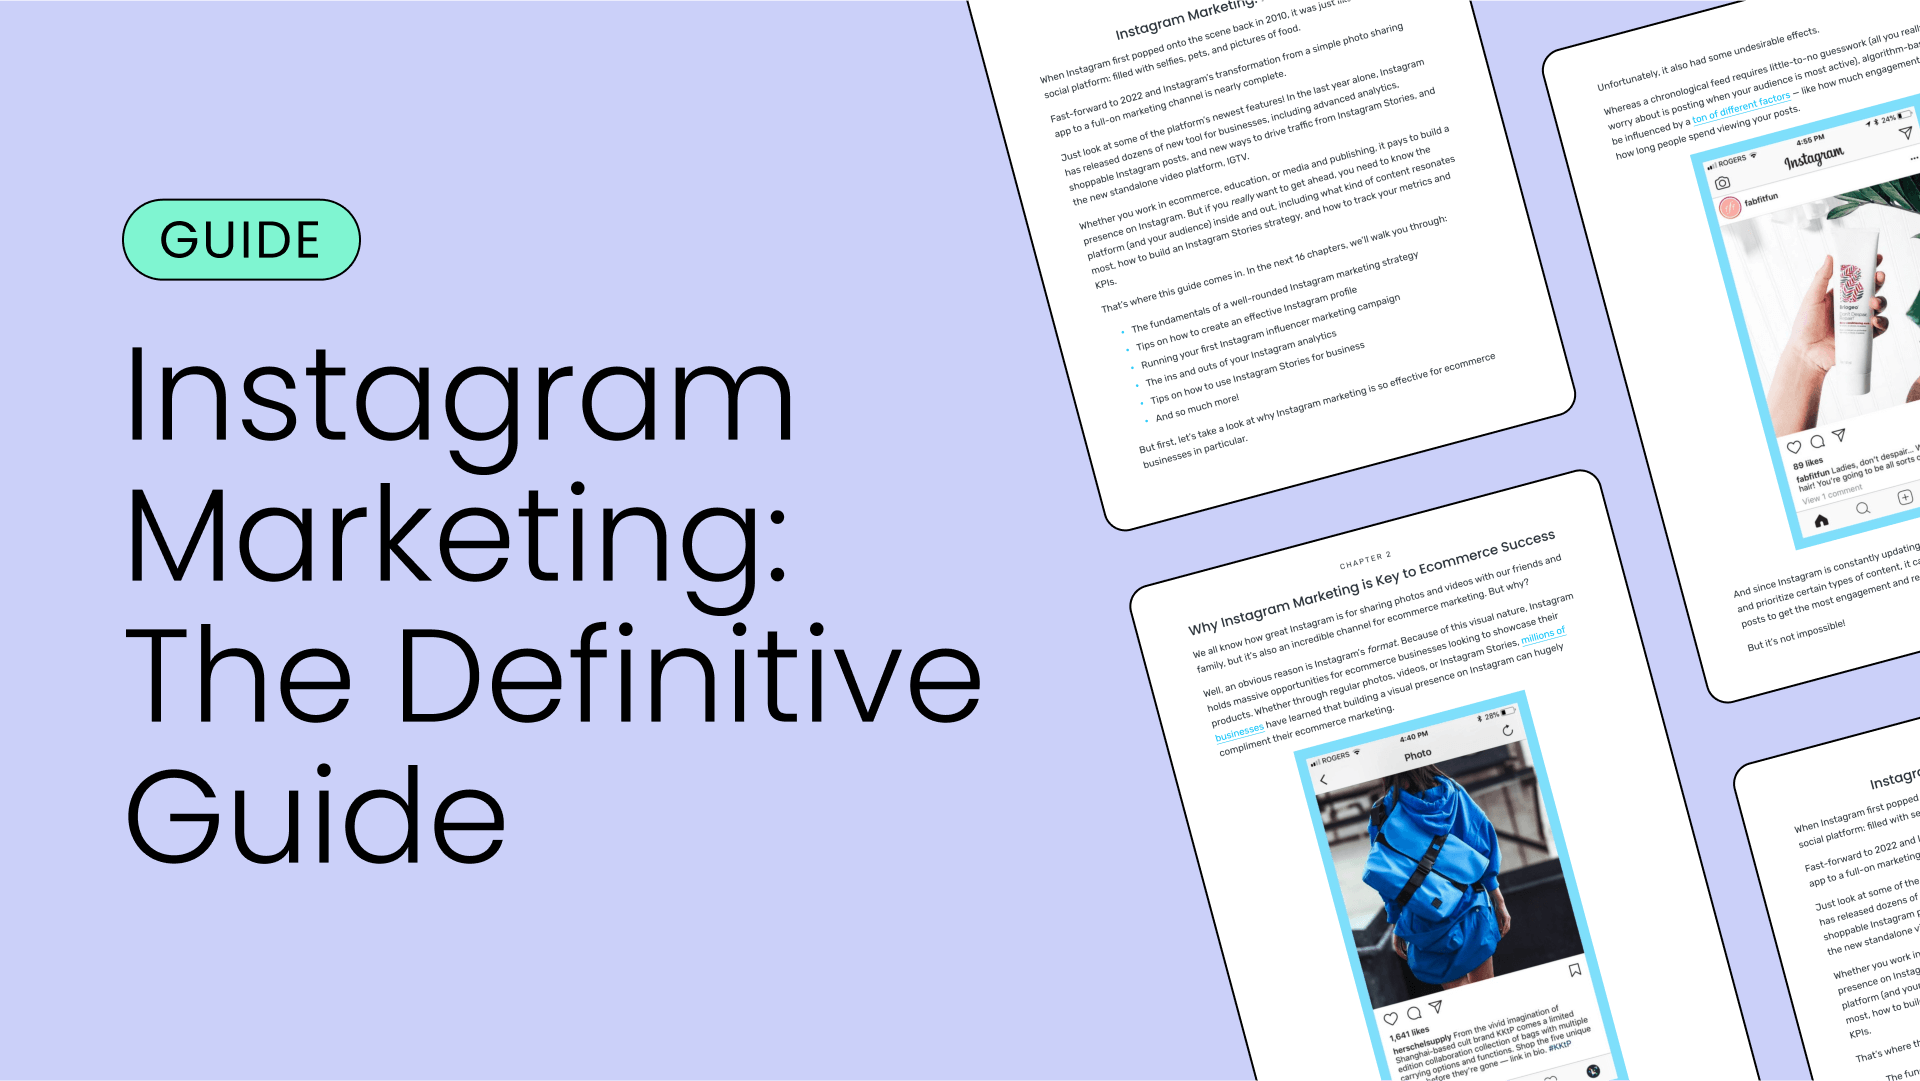 Thumbnail image with the title “instagram marketing: the definitive guide” beside a collage of sample images of the guide